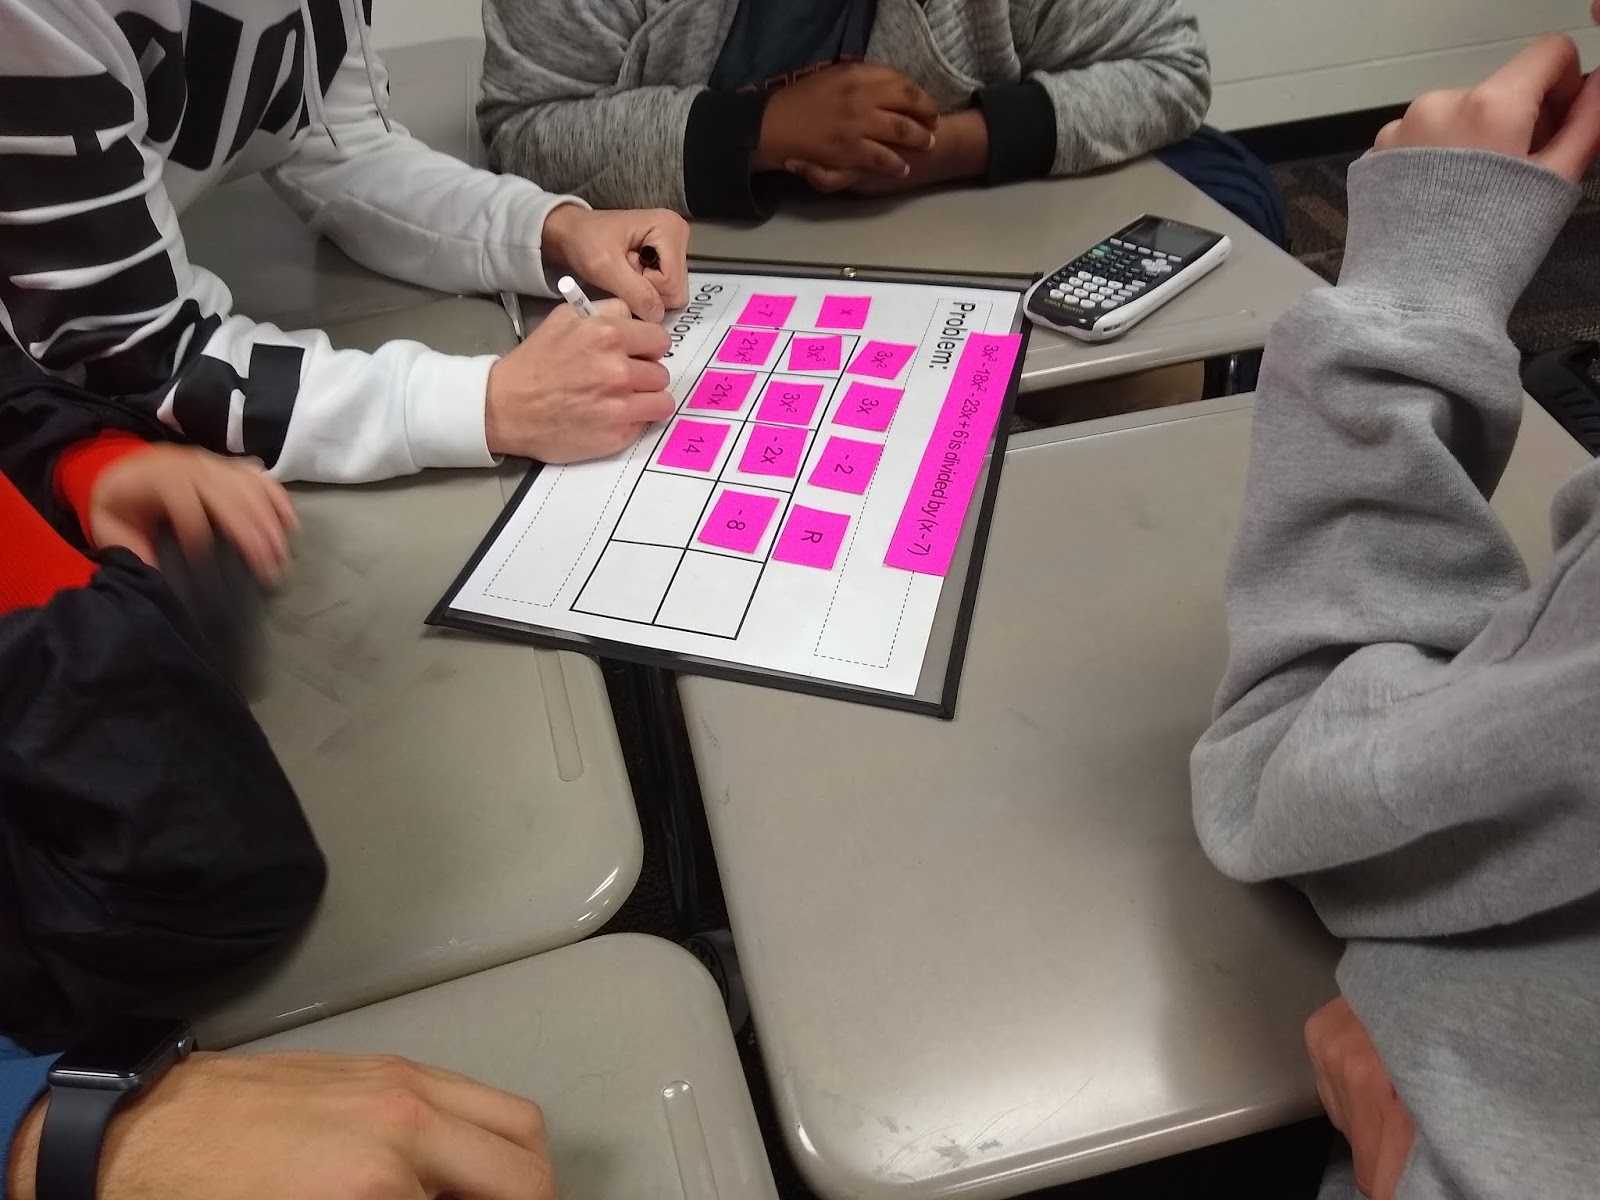 Dividing Polynomials Using the Box Method Puzzle for Algebra 2 or Pre-Calculus Activity